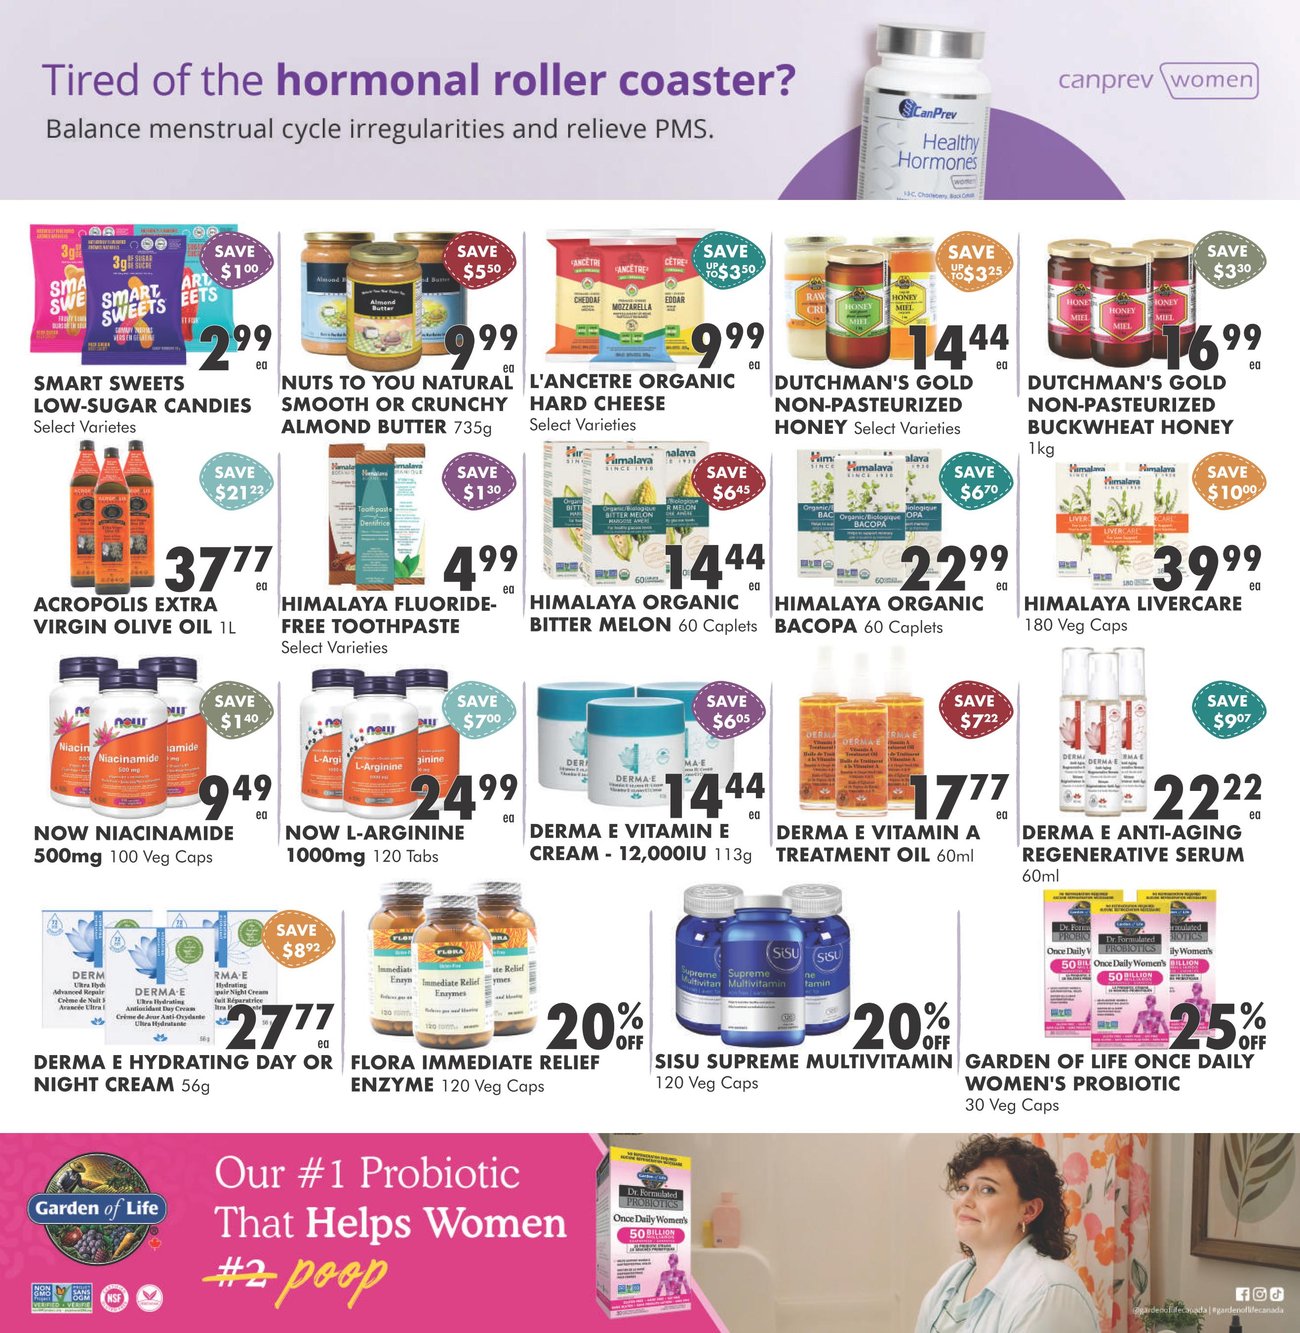 Ambrosia Natural Foods - Monthly Specials - Page 3